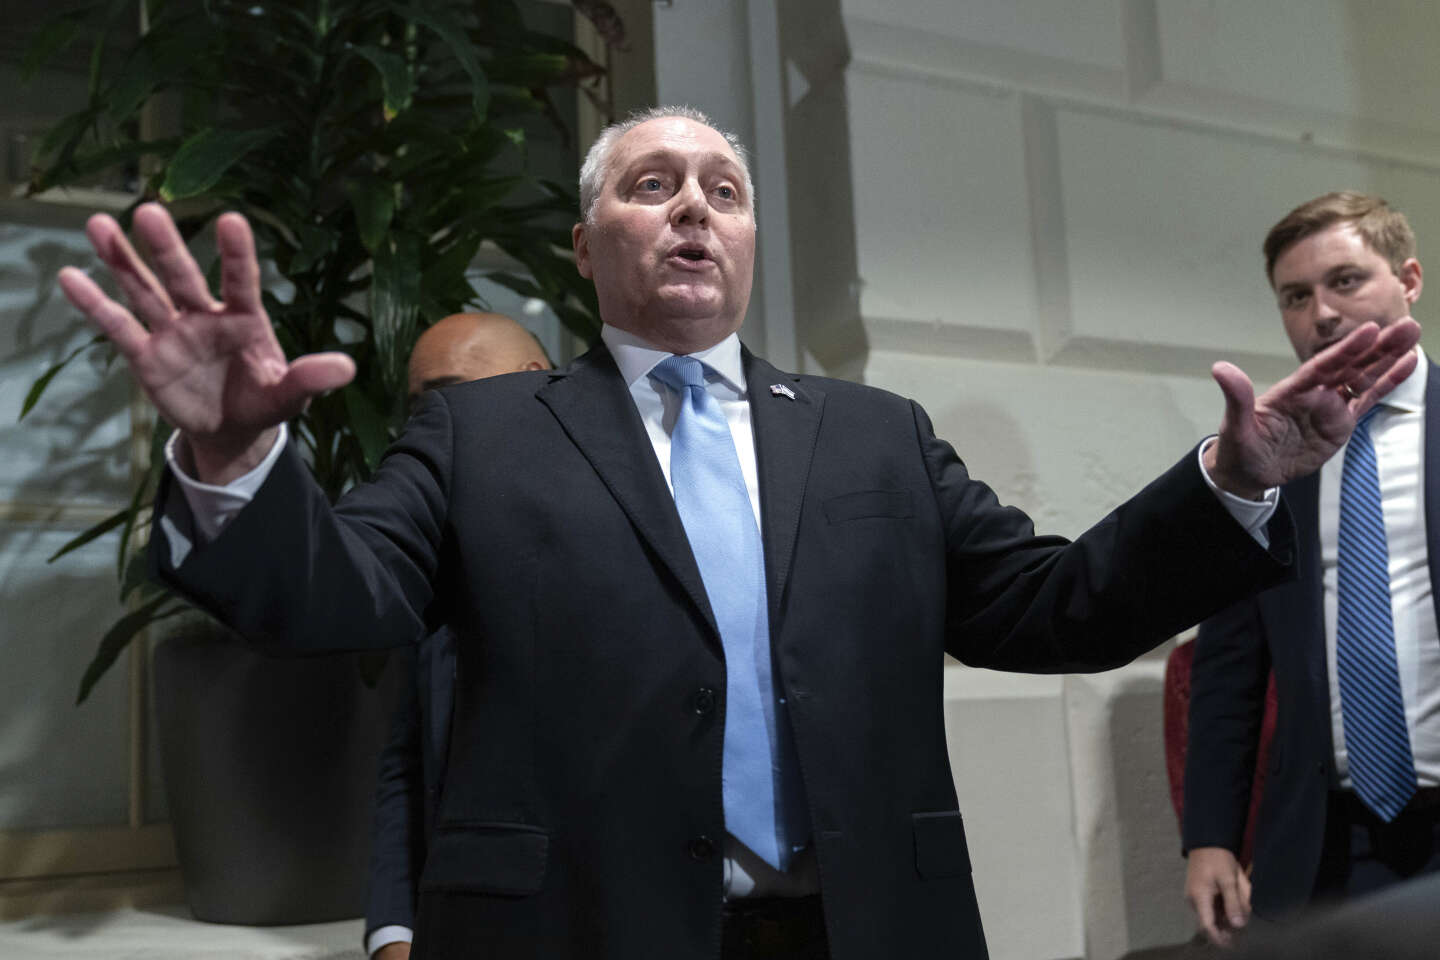 Steve Scalise, the Republican nominee for Speaker of the House of Representatives, has withdrawn his candidacy.